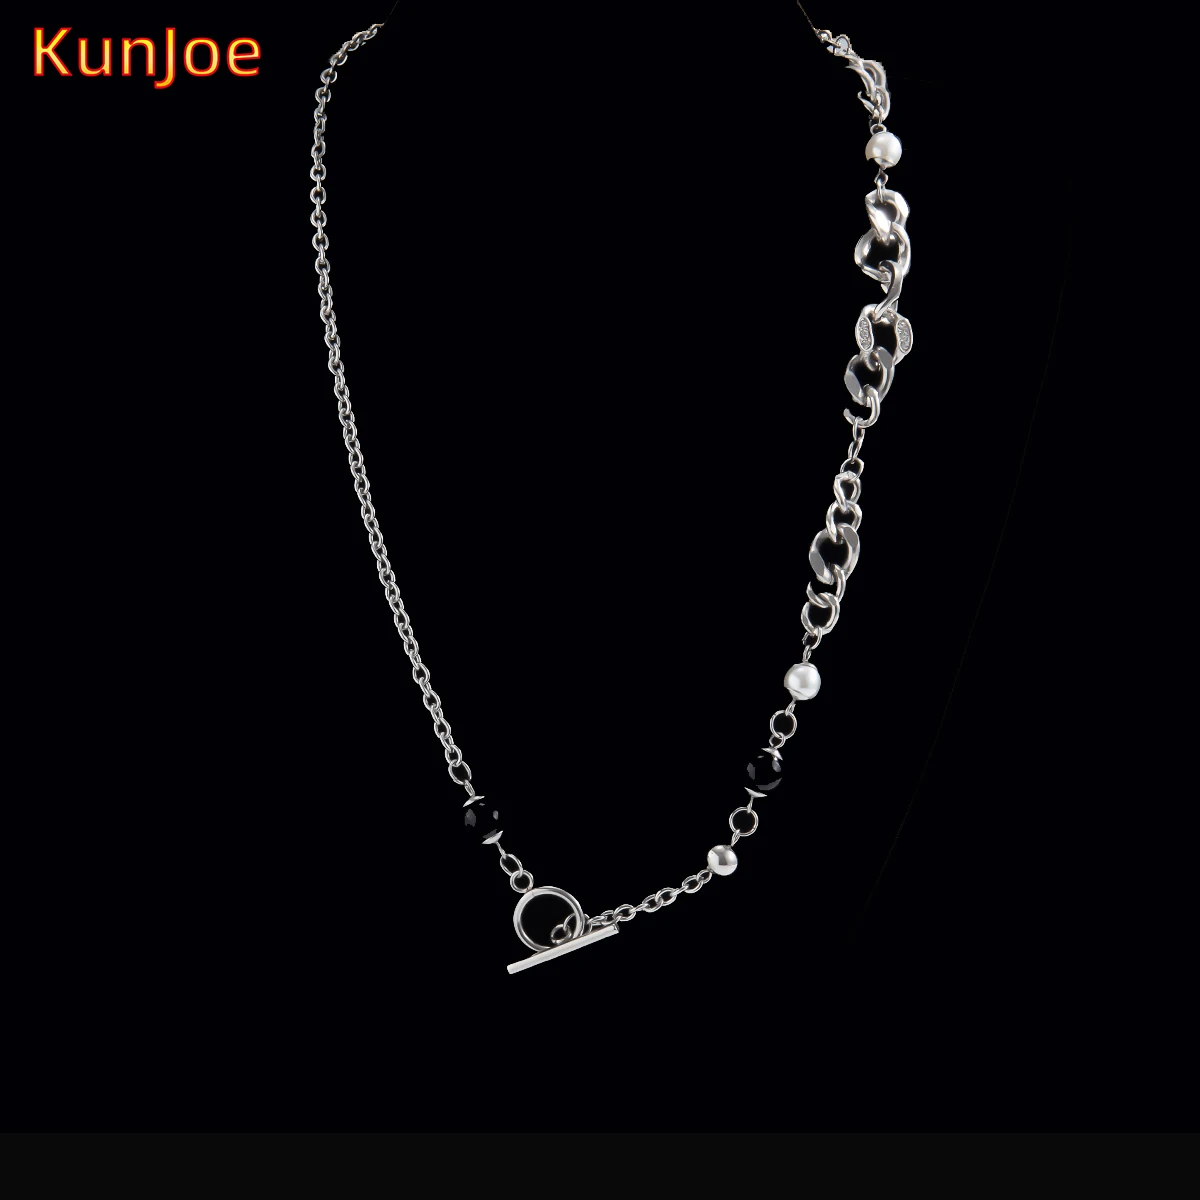 

KunJoe Punk Gothic Necklace for Women Men Fashion Black Color Beads Choker Pearl Necklace OT Clasp Chain Necklace Jewelry Gift